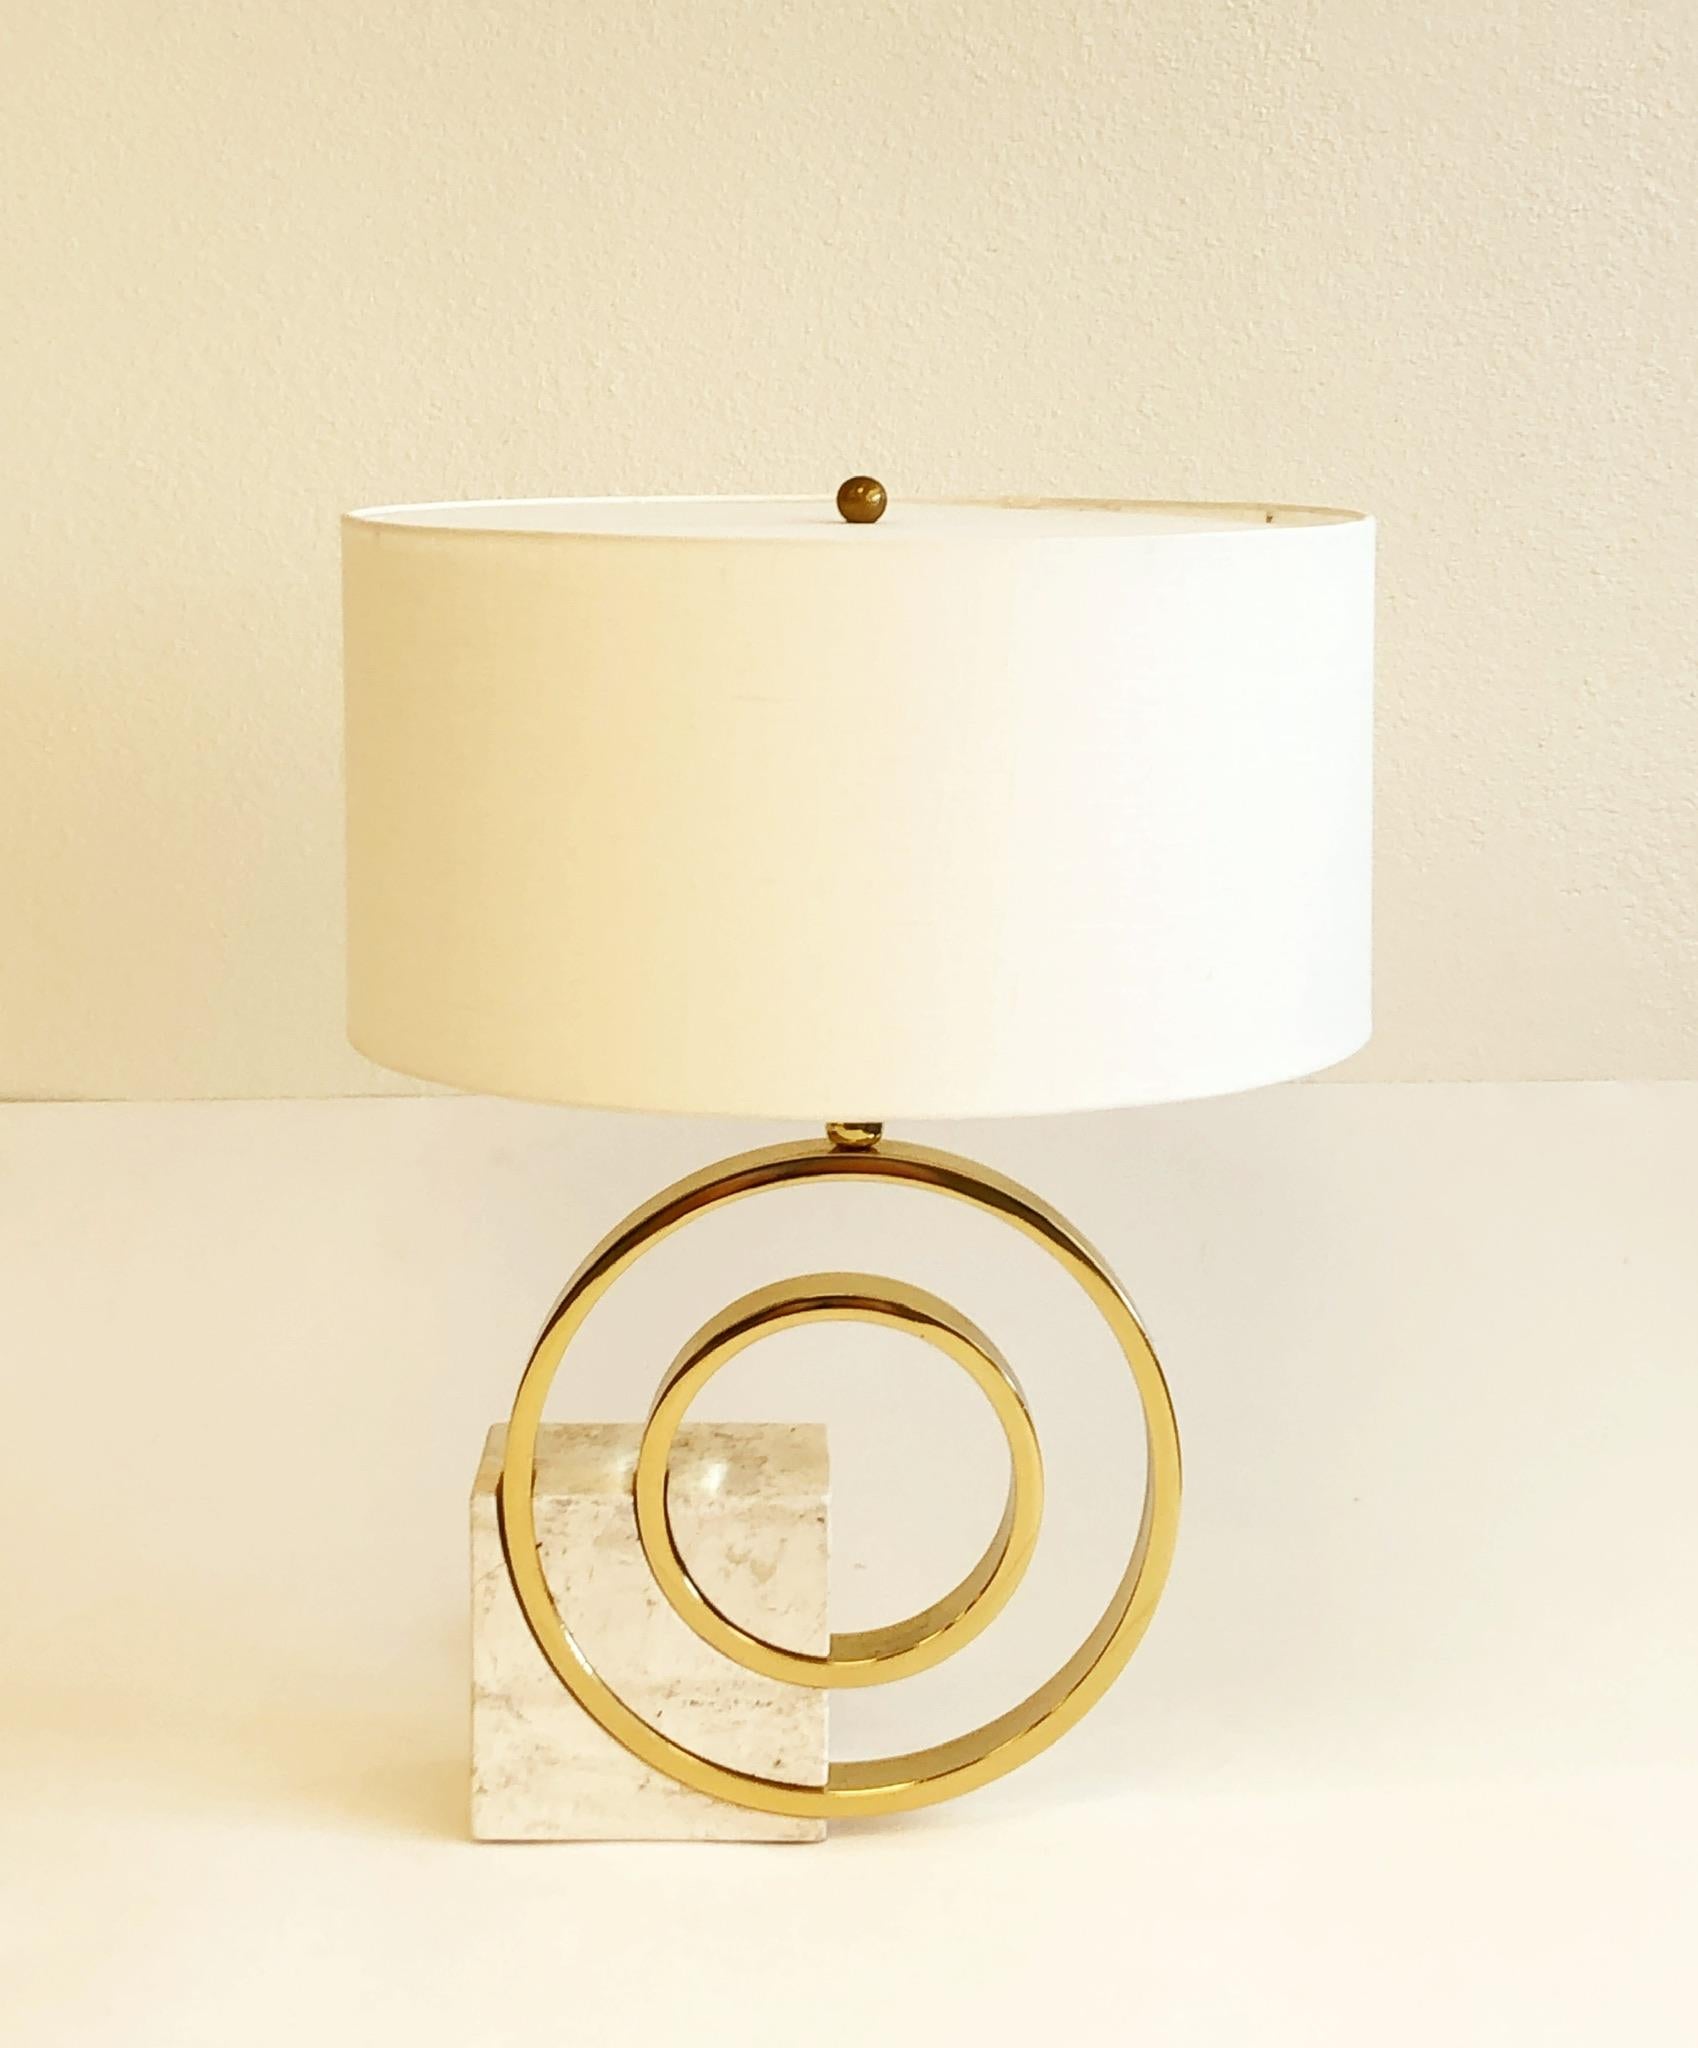 A sculptural Italian travertine and polish brass table lamp designed in the 1970’s by Giovanni Banci for Banci Firenze. The lamp has been newly rewired with new polish brass hardware and new vanilla linen shade. The shade diffuser is made out of